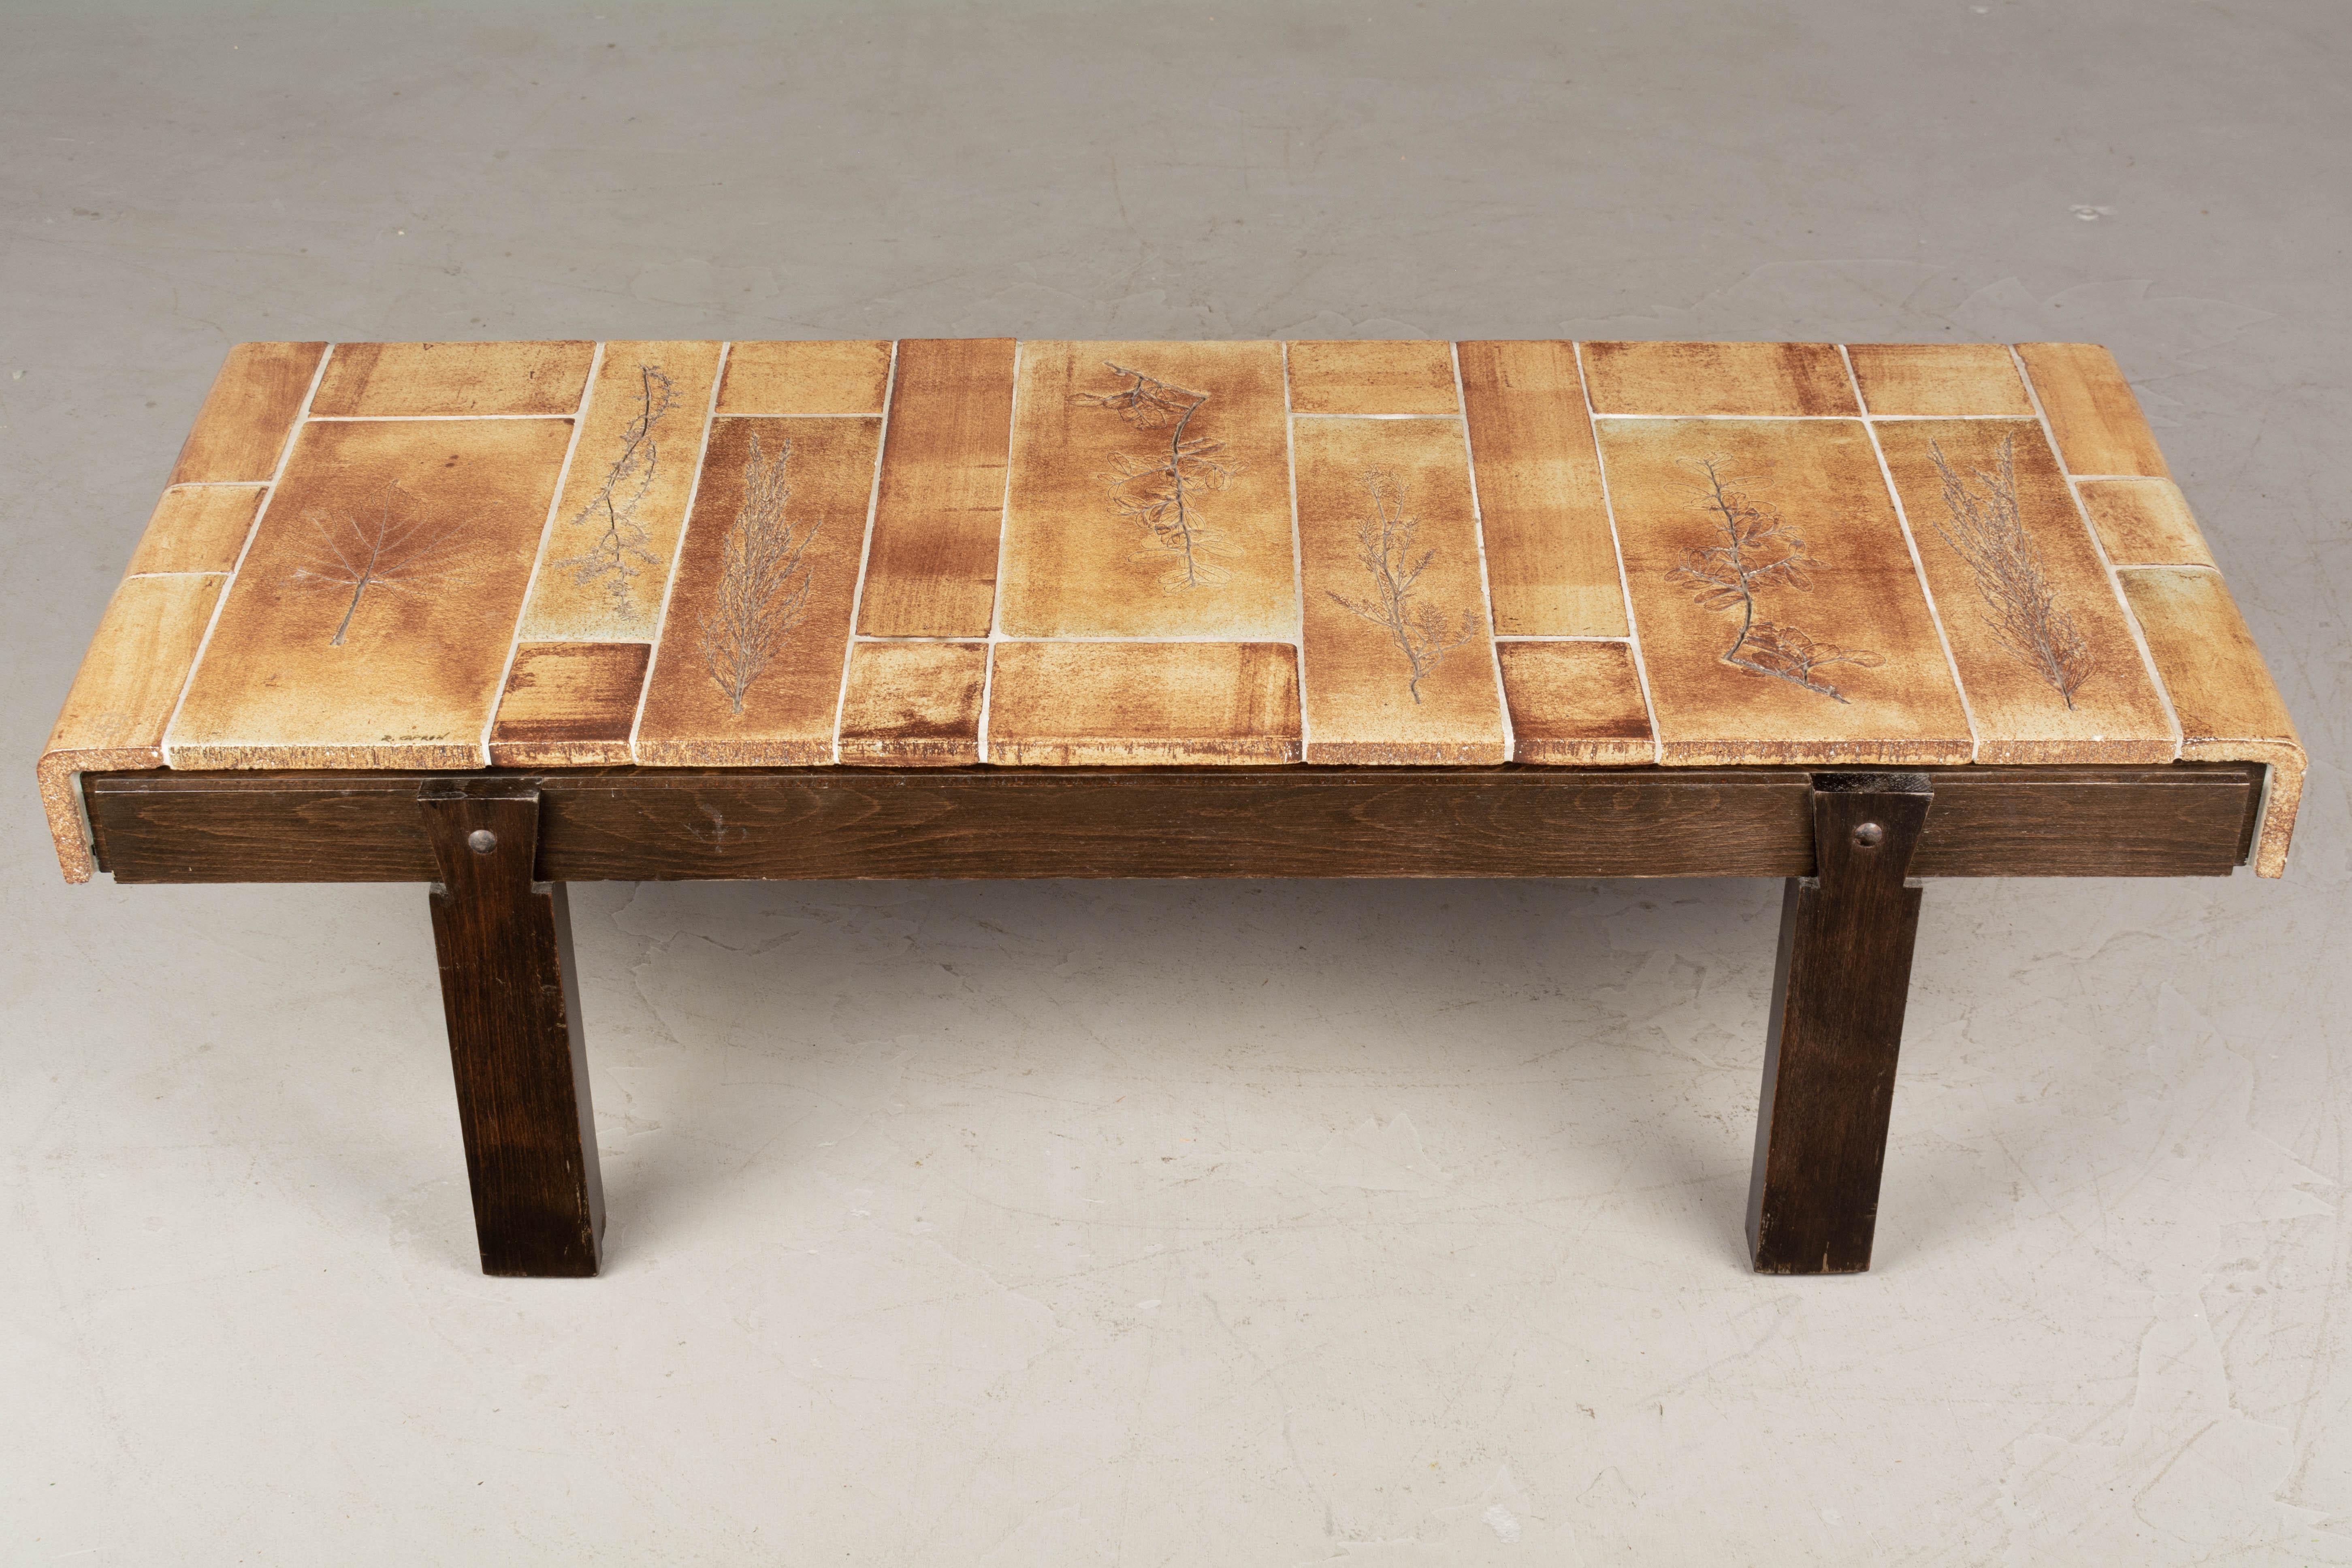 A Roger Capron coffee table from his Garrigue series with a solid oak base and a top made of finely crafted earthenware ceramic tiles imprinted with various plant specimens to look like fossils. Garrigue refers to the vegetation that grows wild on